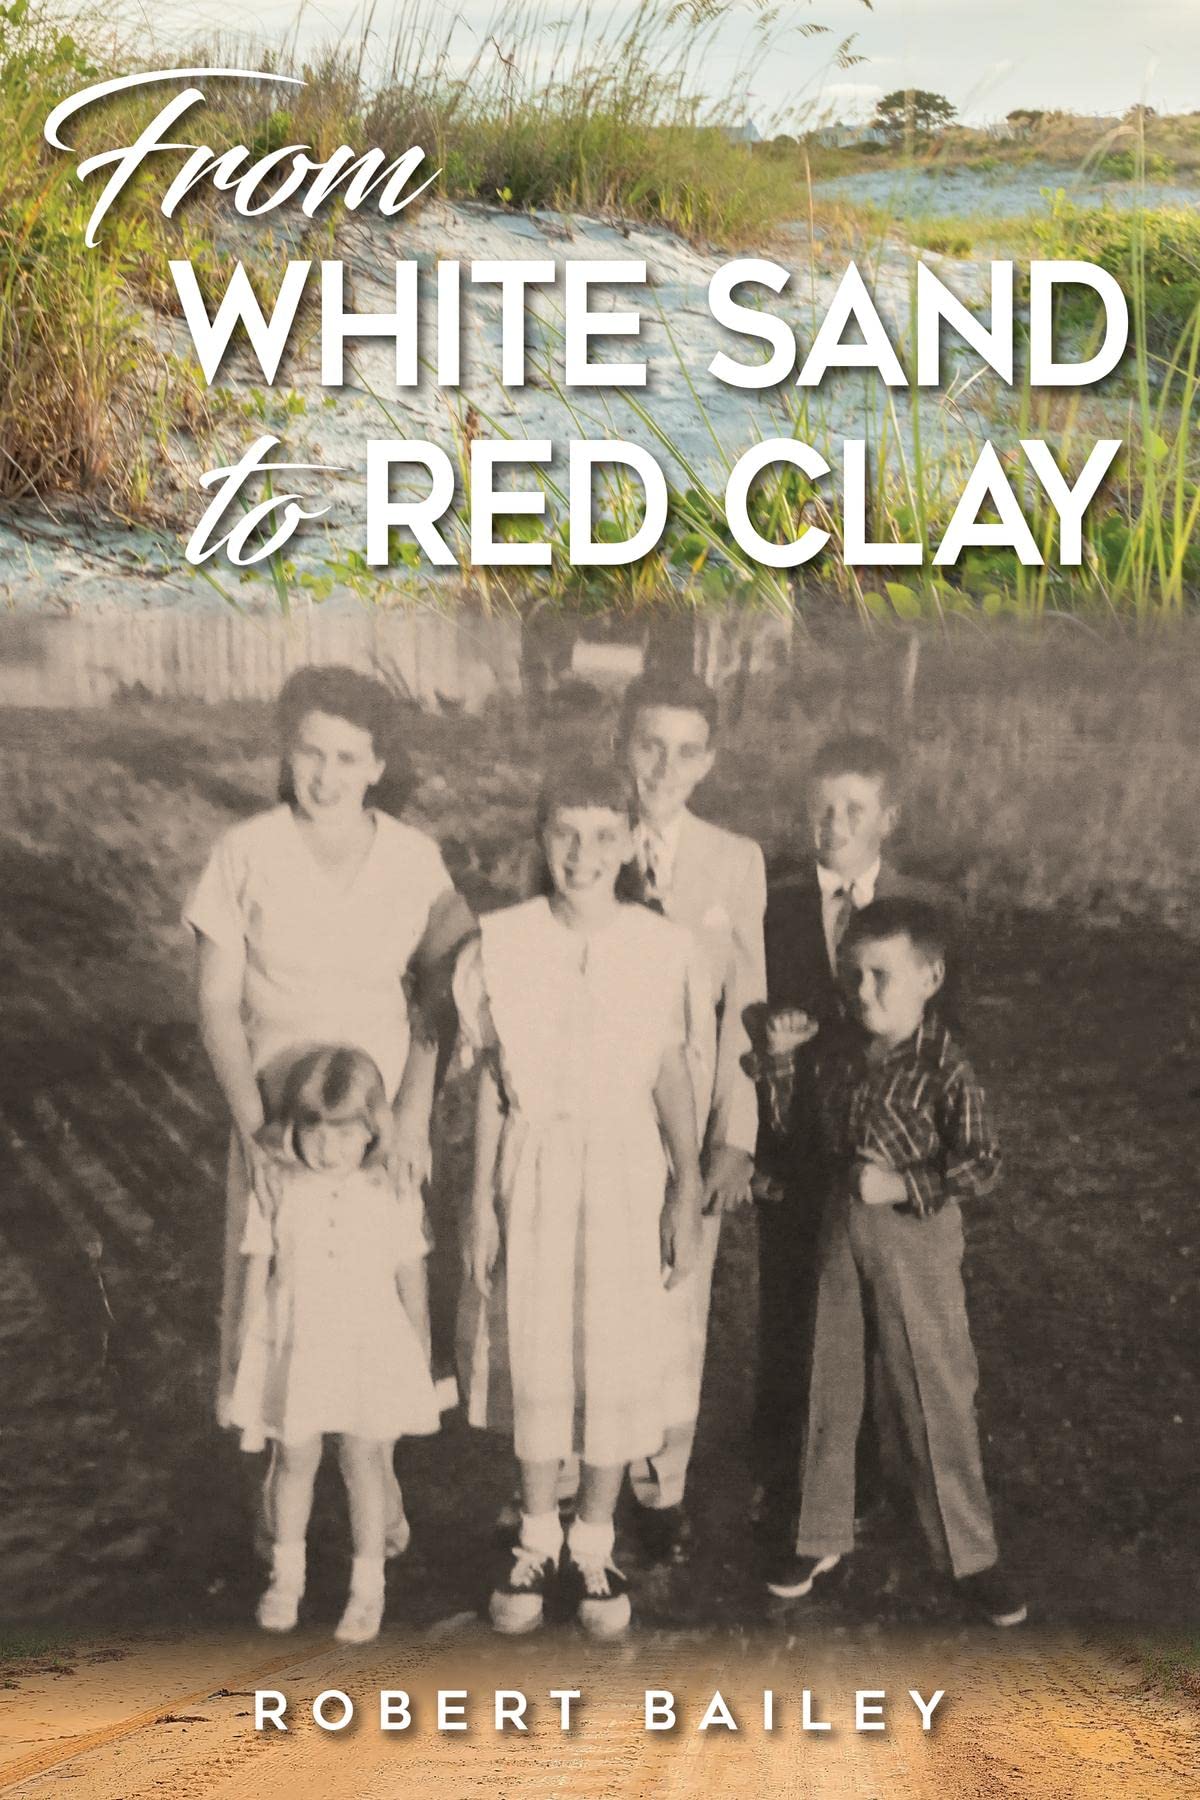 "From White Sand to Red Clay" - author talk and booksigning